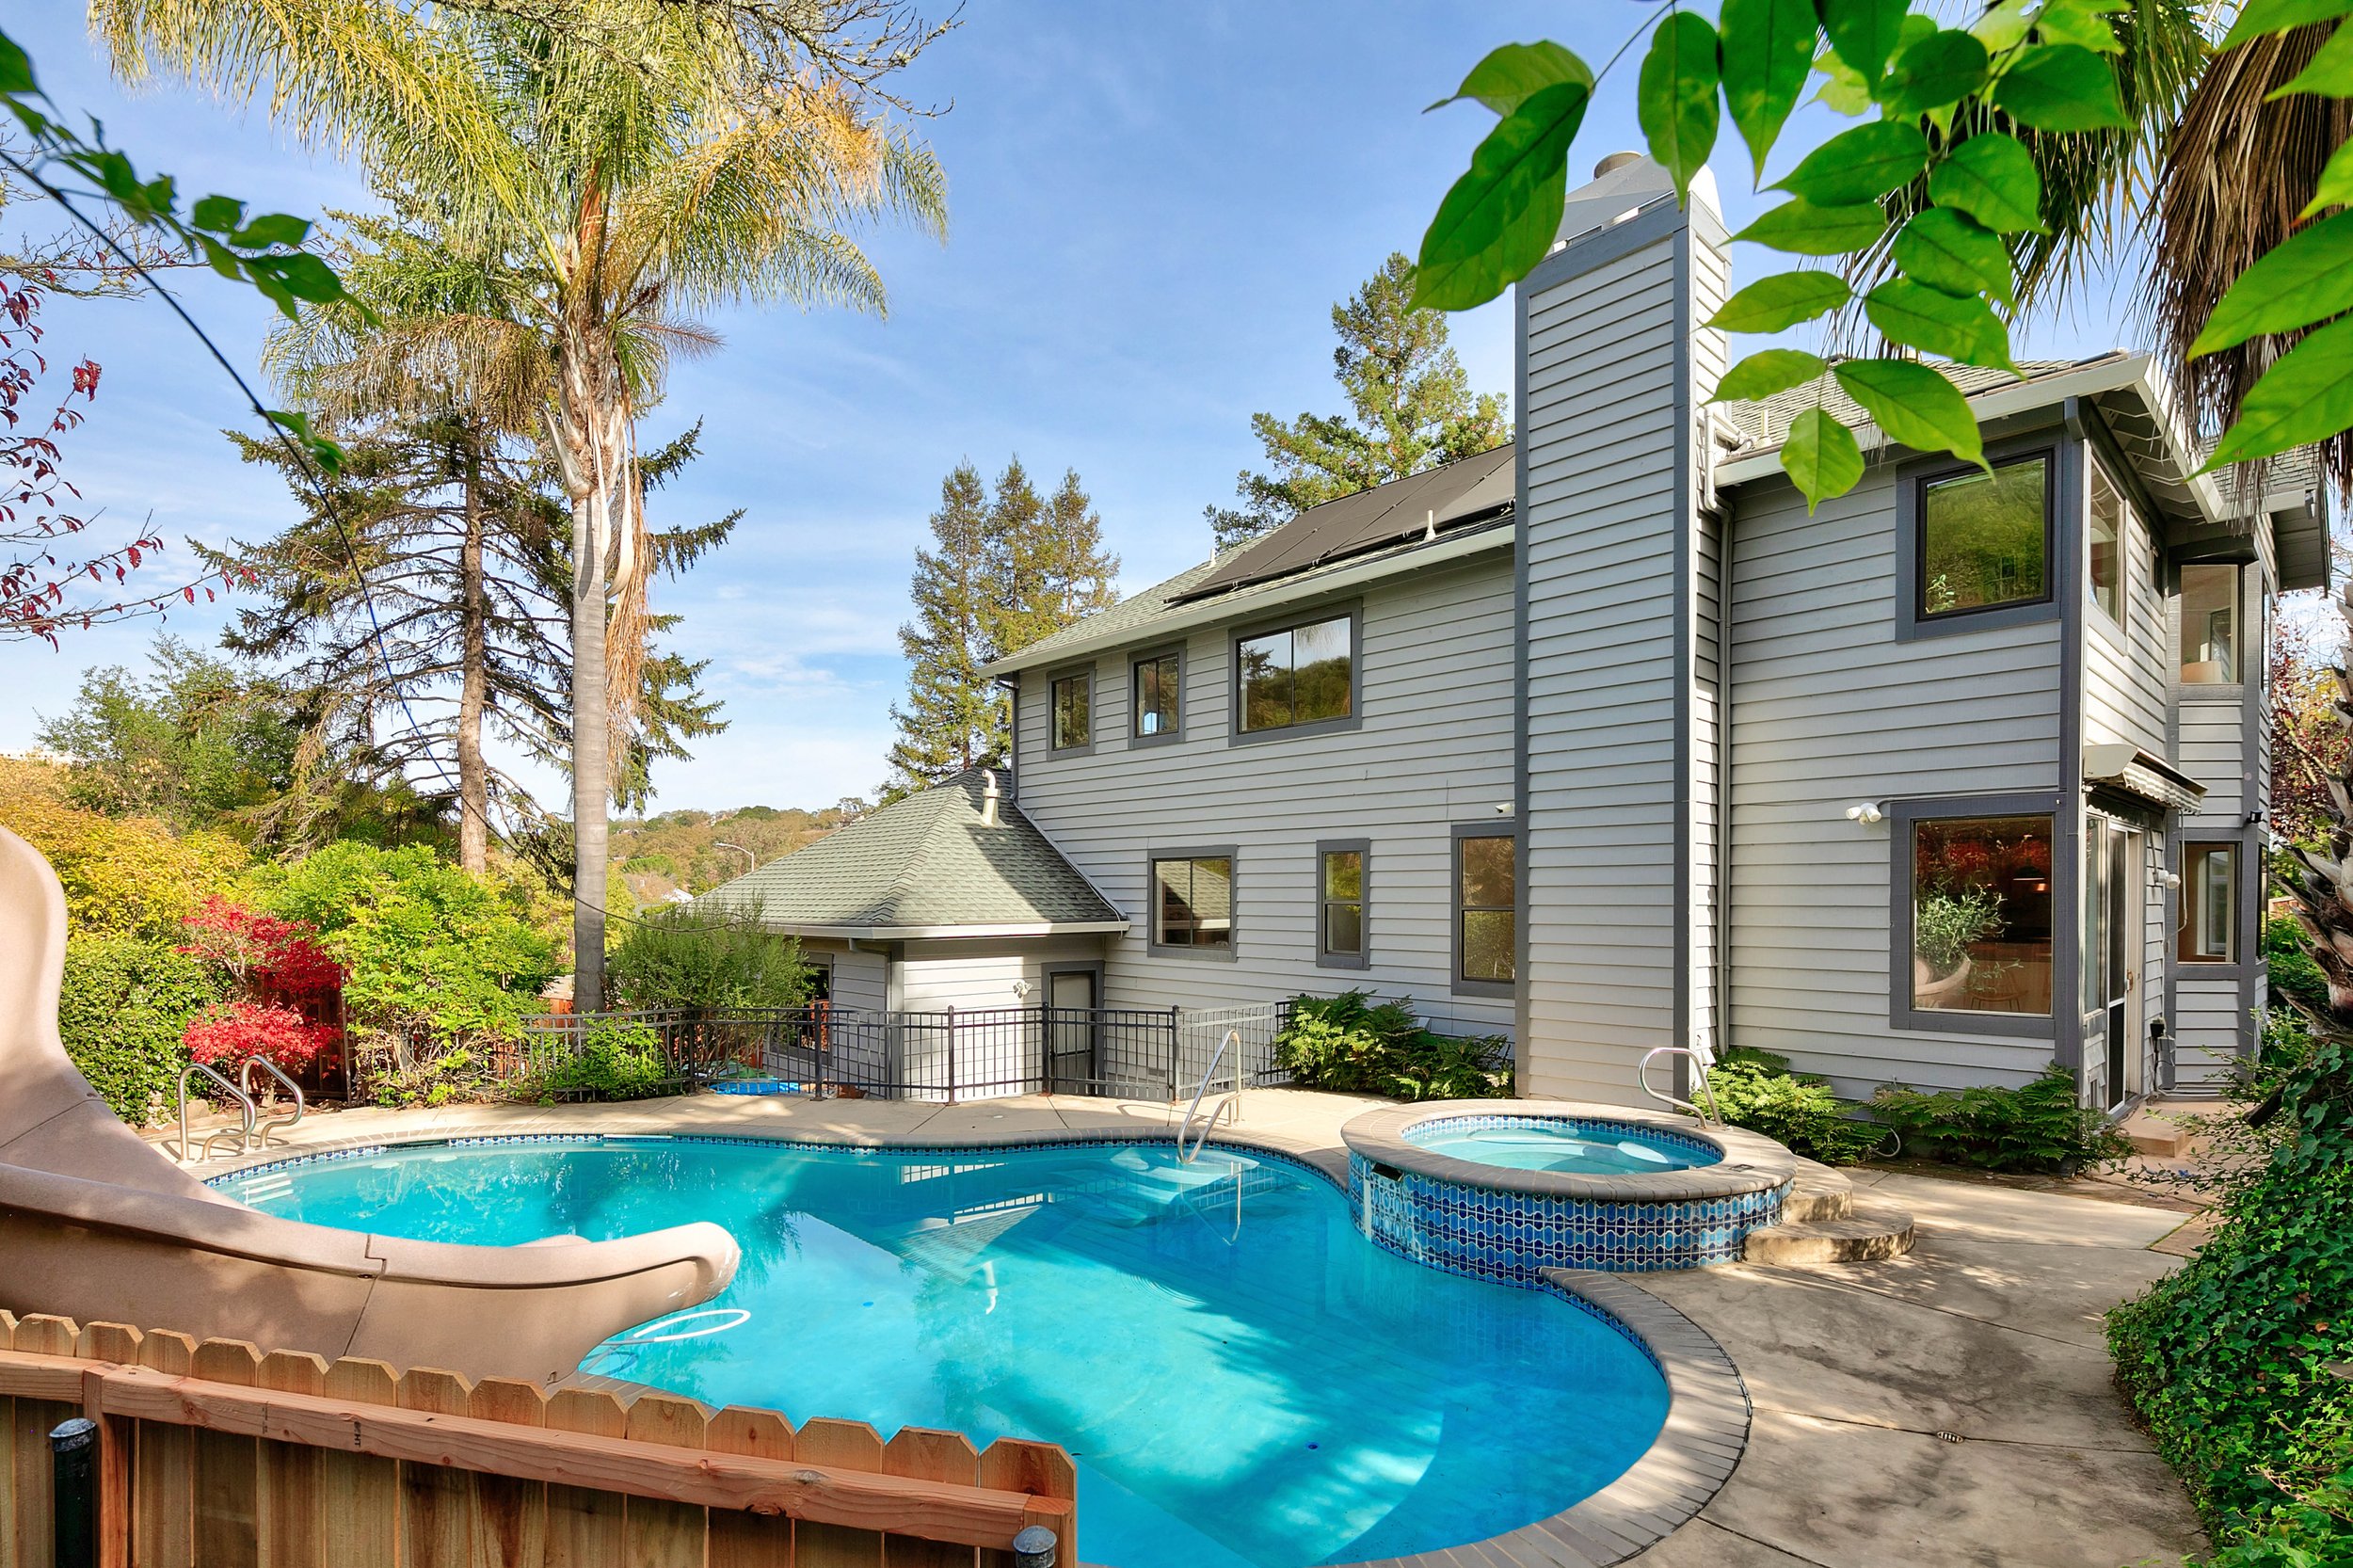 174 Butterfield Road San Anselmo Real Estate For Sale by Realtor Barr Haney at Own Marin Real Estate Agent-37.jpg